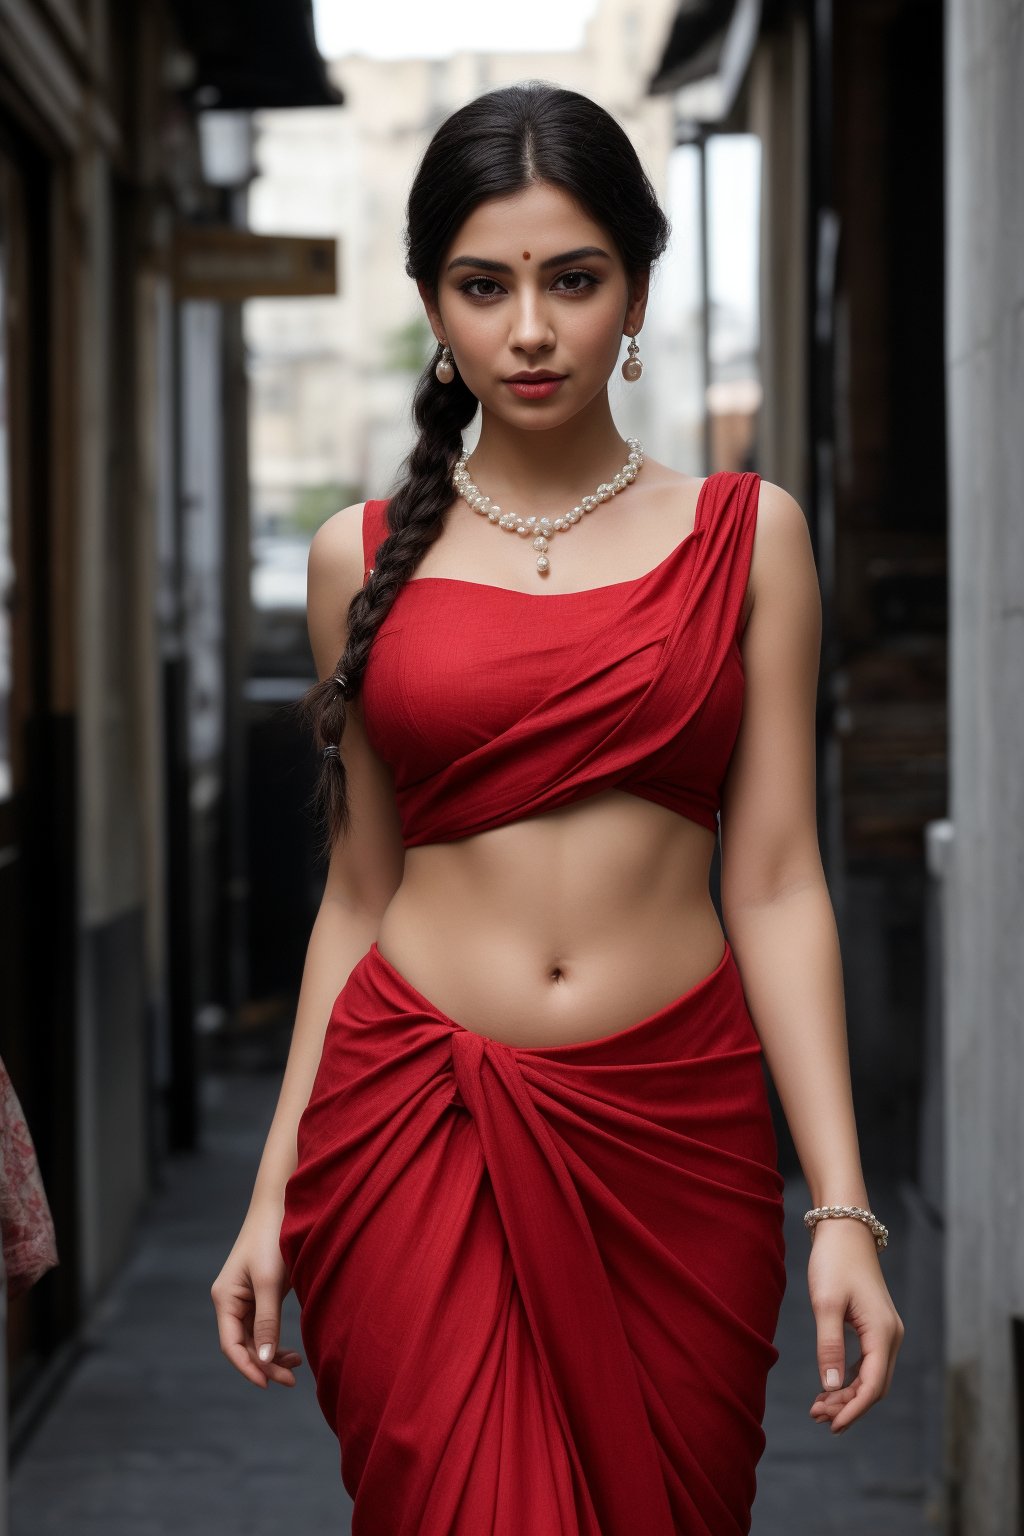 Russian girl, in city, out side, Red hair braided hair:2, She remove Her  saree from  navel,  front view, braided hair tail, A sultry shot of a 28-year-old woman wearing a stunning  saree:1, showcasing her curvy figure. She poses solo-focused, looking directly at the viewer with alluring hair. Her thick body is accentuated by a sleeveless dress and hotpants, while her big breast,  A pearl necklace adorns her neck, complemented by dangling earrings and a bracelet. Her lips pout slightly, inviting attention to her The background is blurry, with a ground vehicle visible in the distance. Her eyes, like perfect pearls, gaze directly at us, captivating our attention.,Saree 